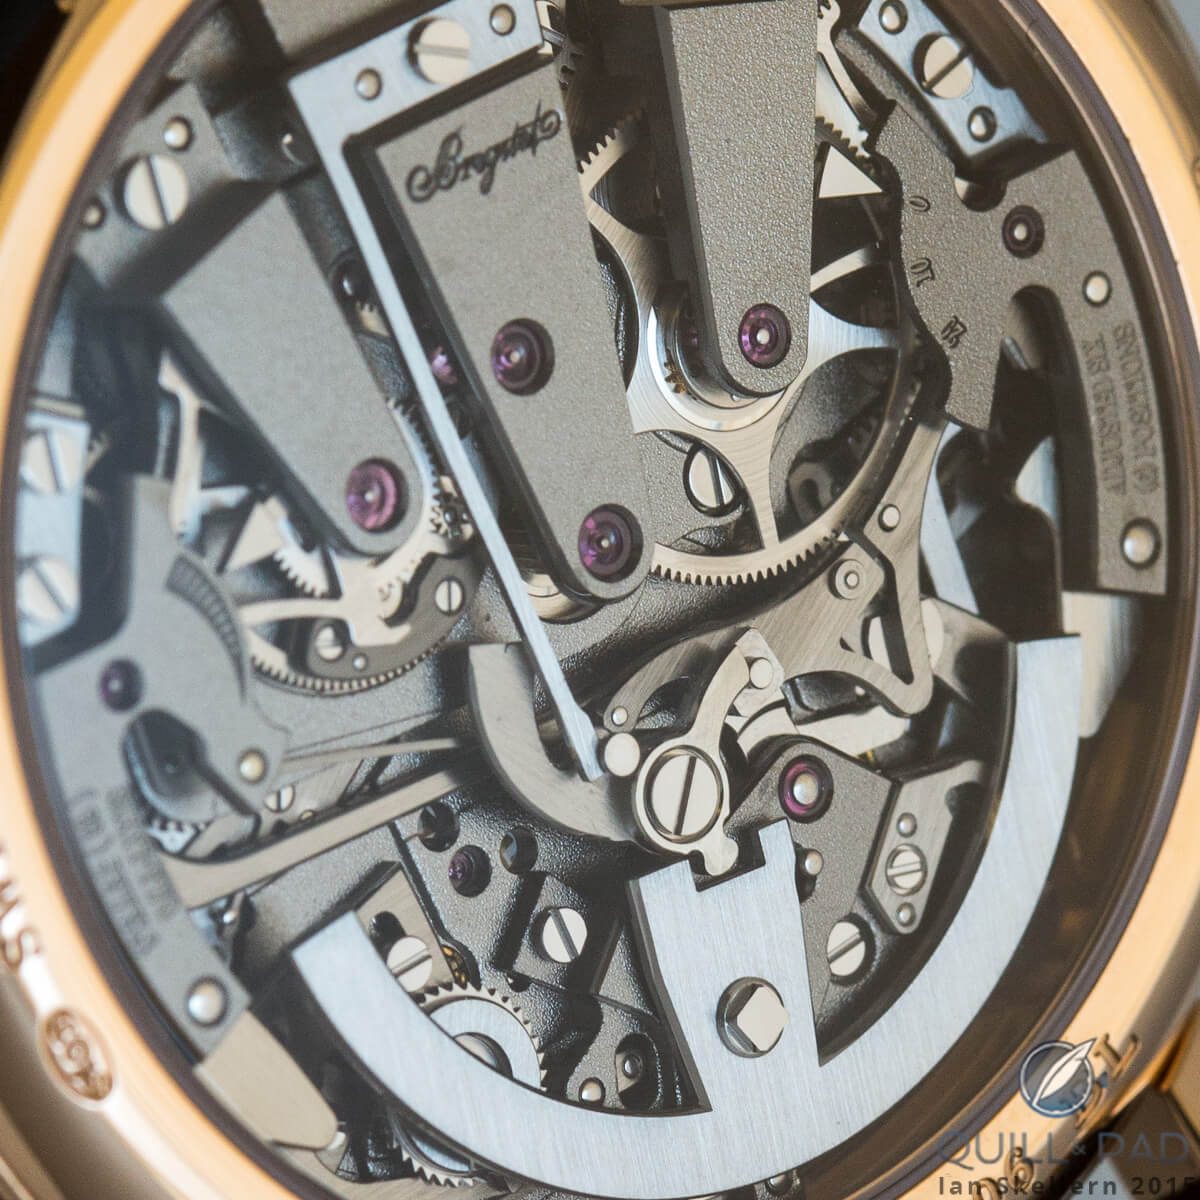 View through the display back of the Breguet 7077 La Tradition Independent Chronograph